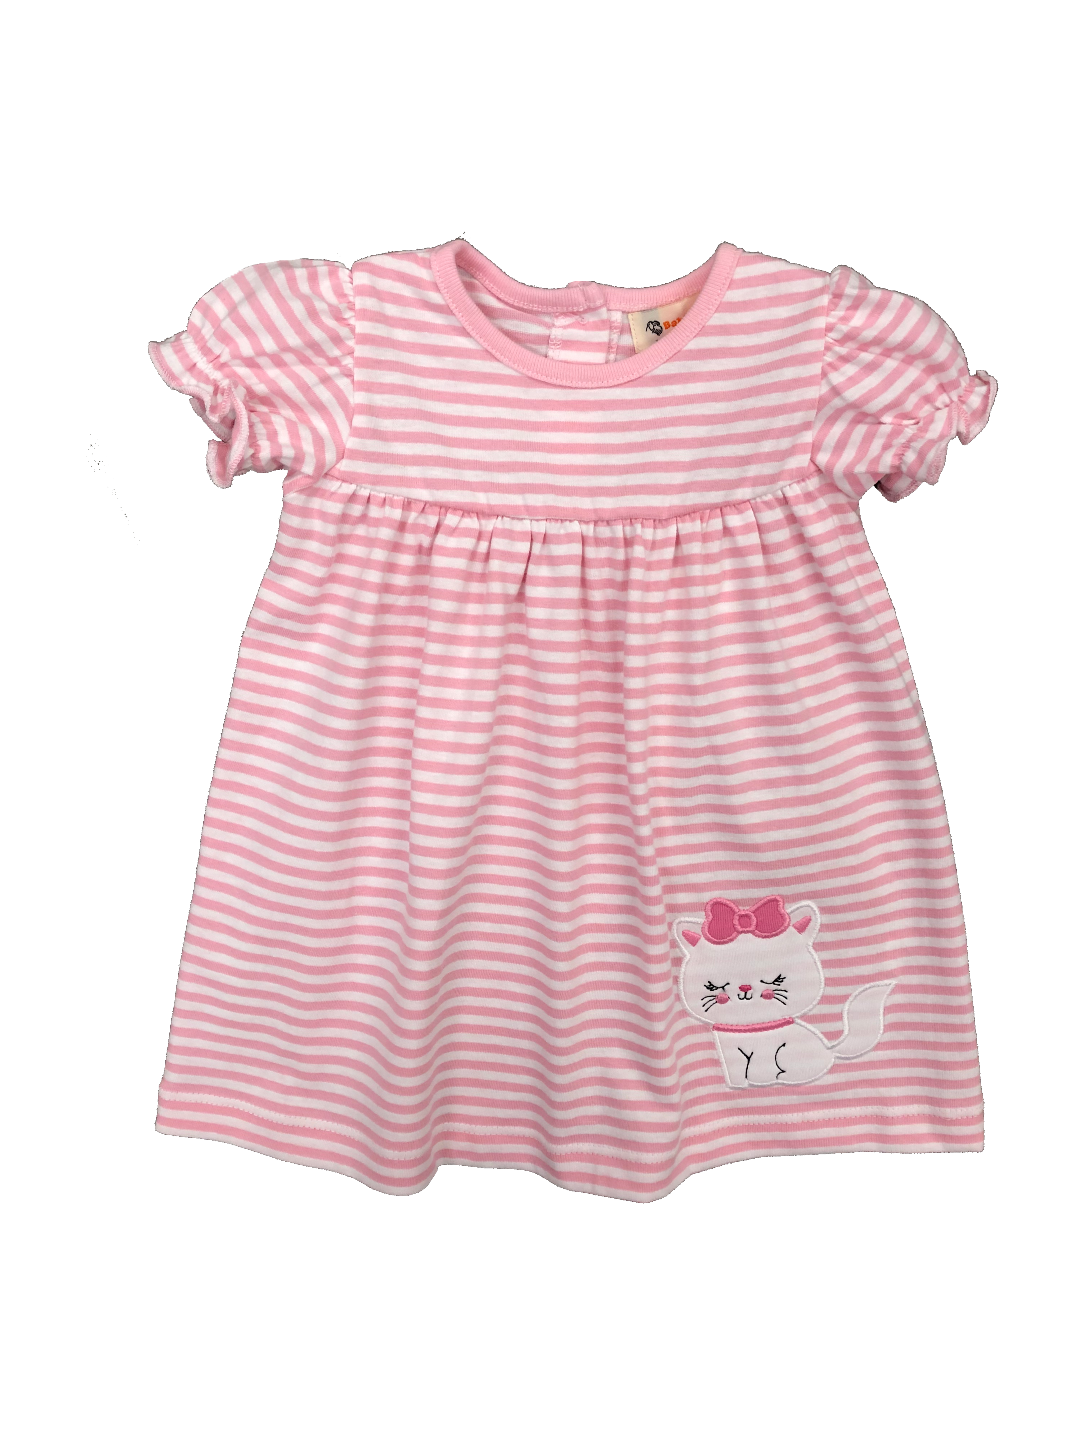 Pink Stripe Knit Dress with kitty/bow applique